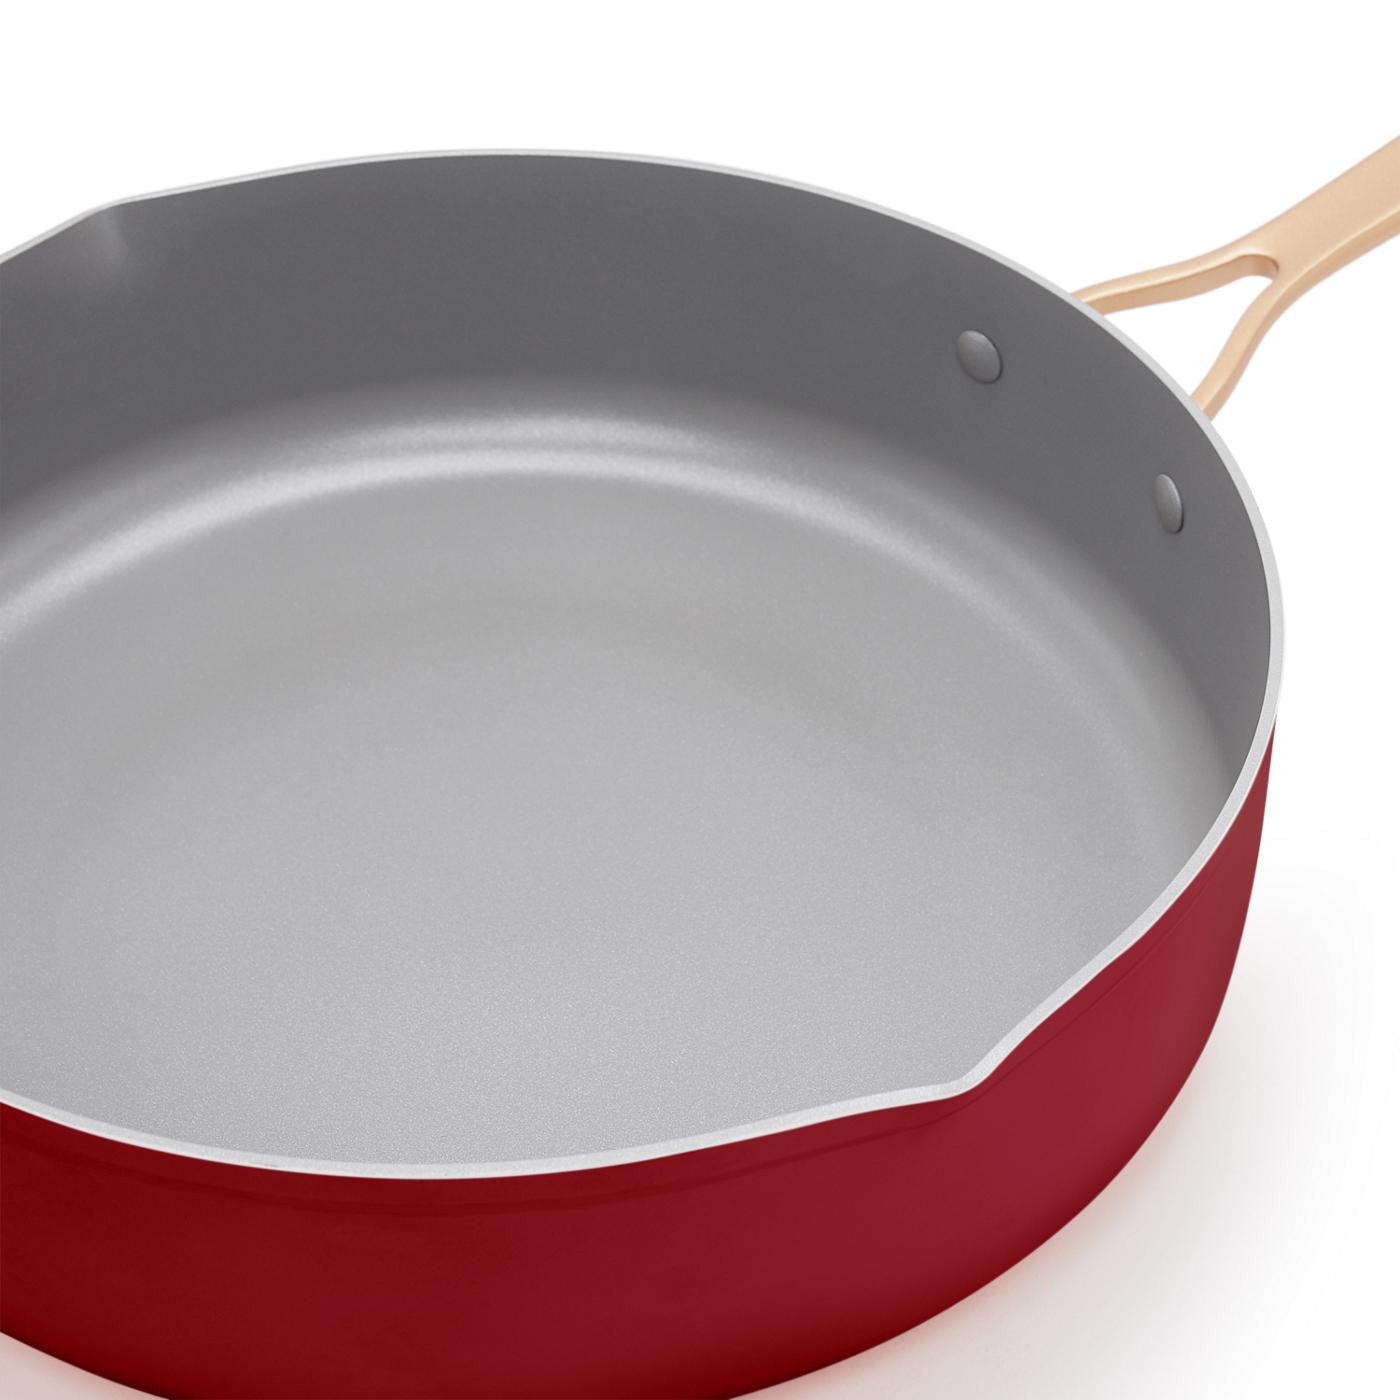 Kitchen & Table by H-E-B Non-Stick Sauté Pan with Strainer Lid - Bordeaux Red; image 4 of 7